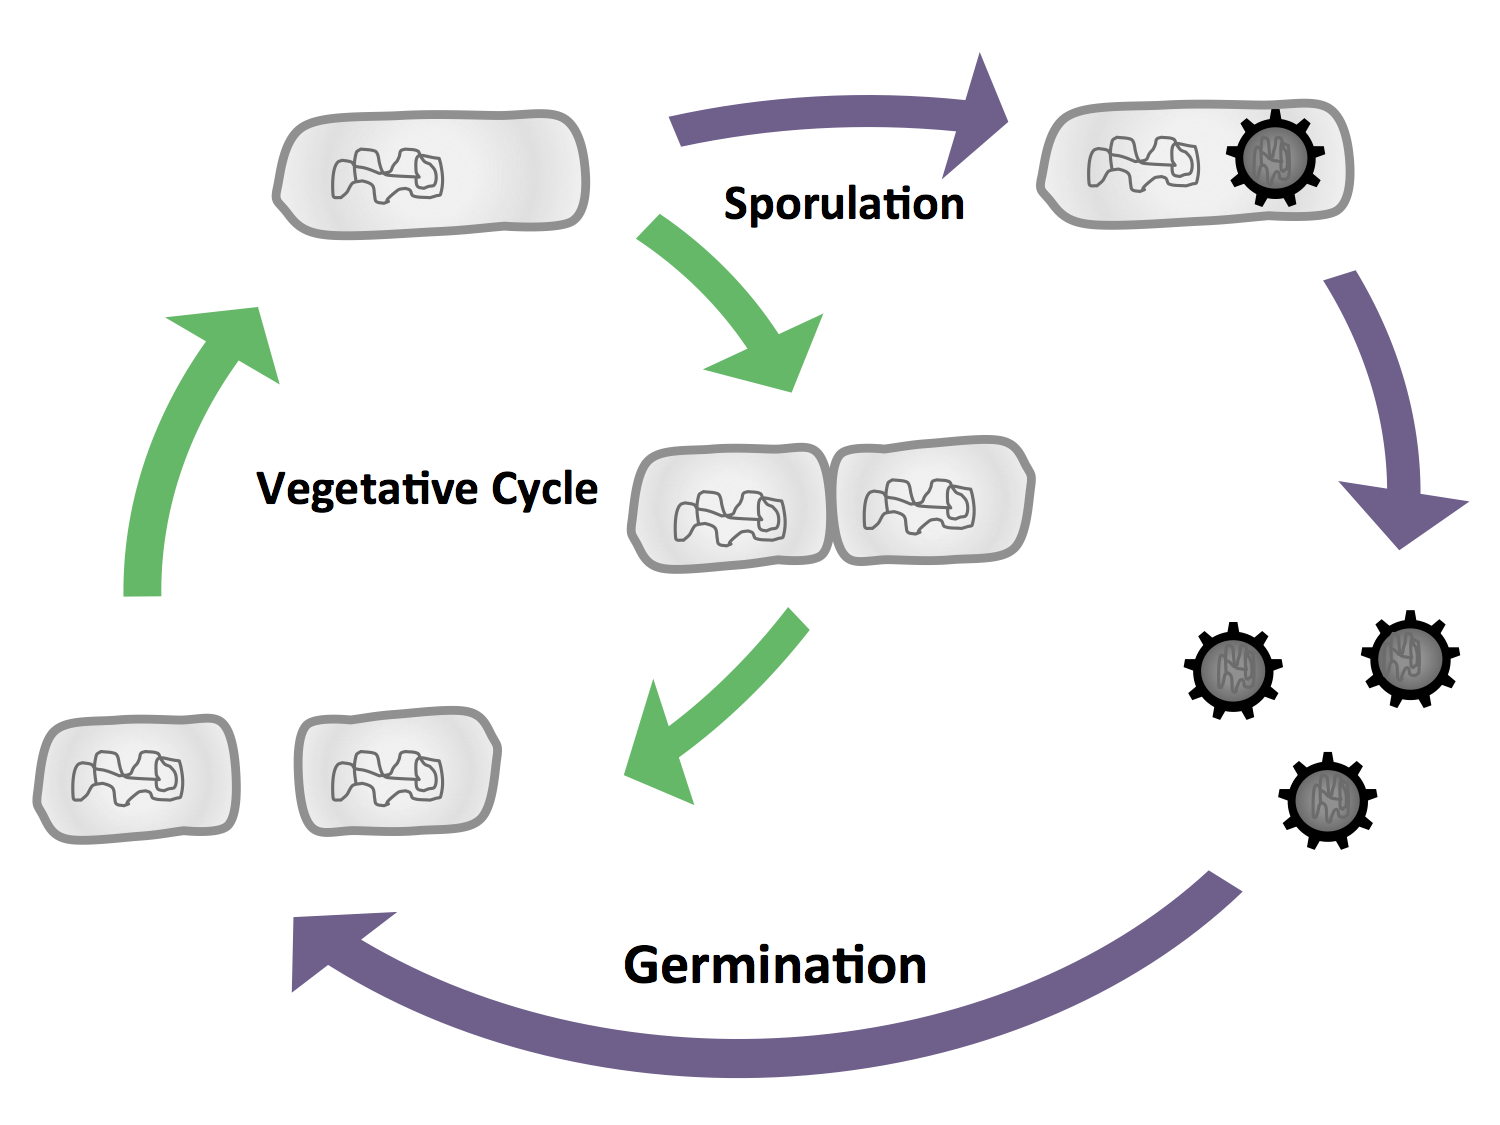 Figure 1: The vegetative cycle is very similiar to the one of E. coli. But if there is a stress condition like starvation, the cells enter sporulation, where they first undergo a polar cell division, followed by the formation of the endospore. If the enviromental conditions are suitable again, the spore will then germinate and reenter the vegetative cycle.